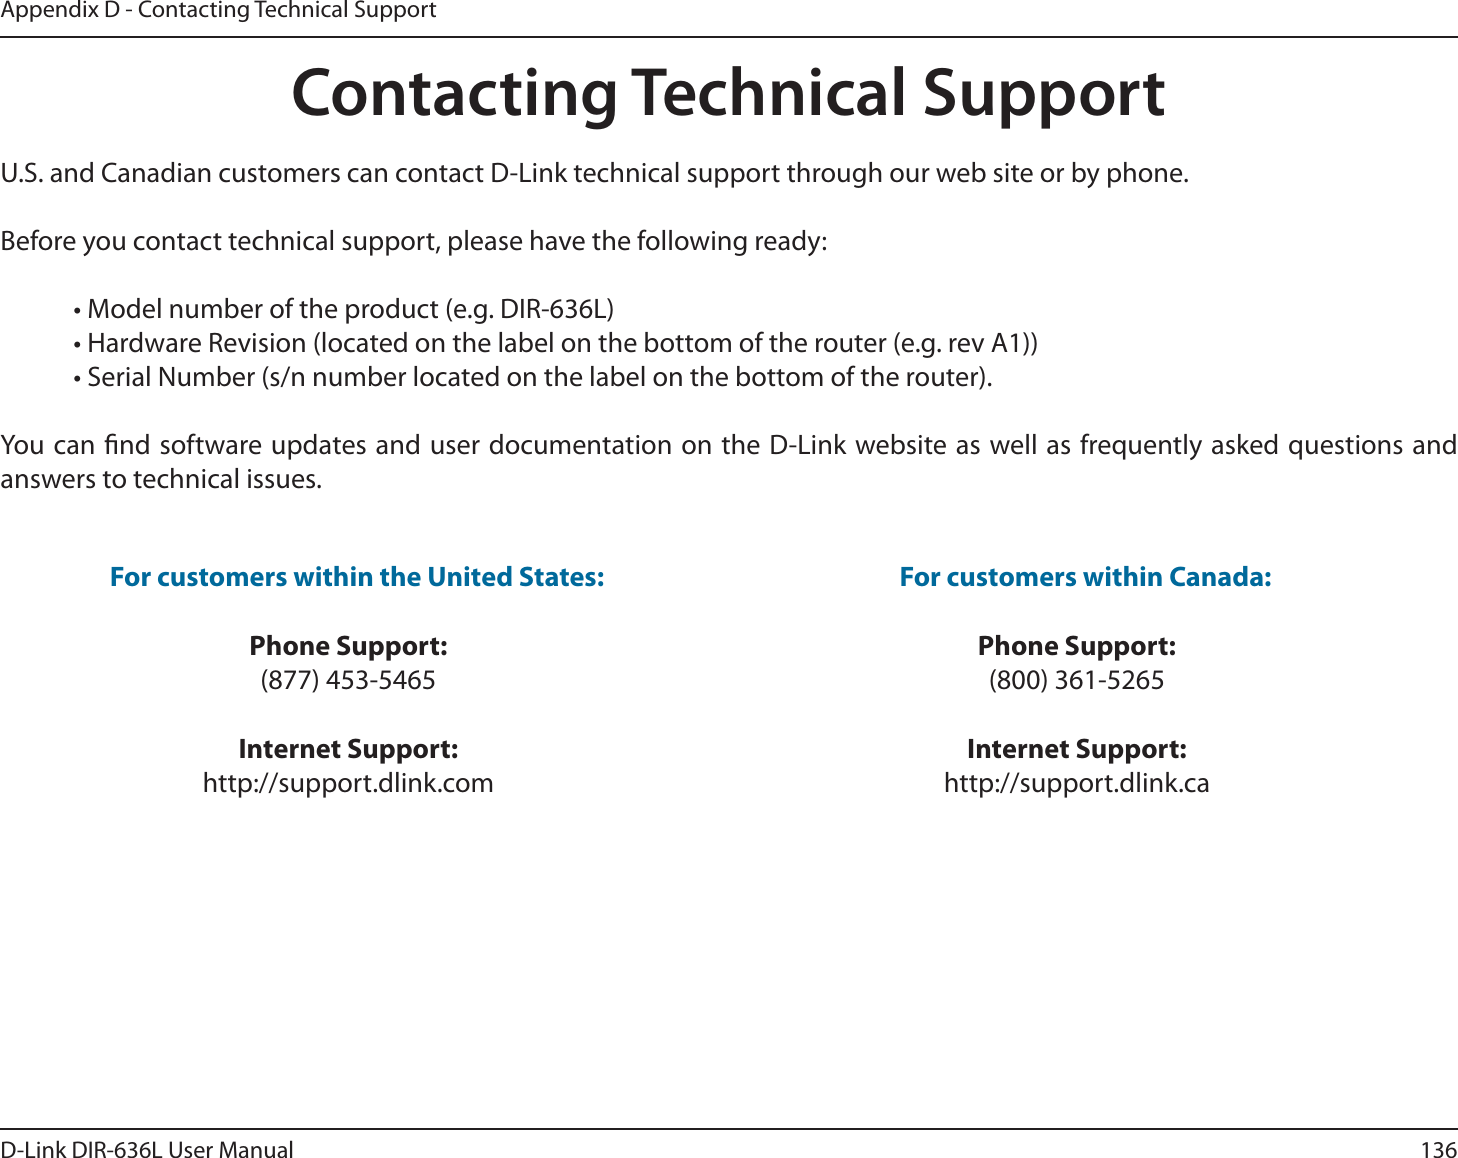 136D-Link DIR-636L User ManualAppendix D - Contacting Technical SupportContacting Technical SupportU.S. and Canadian customers can contact D-Link technical support through our web site or by phone.Before you contact technical support, please have the following ready:  • Model number of the product (e.g. DIR-636L)  • Hardware Revision (located on the label on the bottom of the router (e.g. rev A1))  • Serial Number (s/n number located on the label on the bottom of the router). You can nd software updates and user documentation on the D-Link website as well as frequently asked questions and answers to technical issues.For customers within the United States: Phone Support:(877) 453-5465Internet Support:http://support.dlink.com For customers within Canada: Phone Support:(800) 361-5265Internet Support:http://support.dlink.ca 